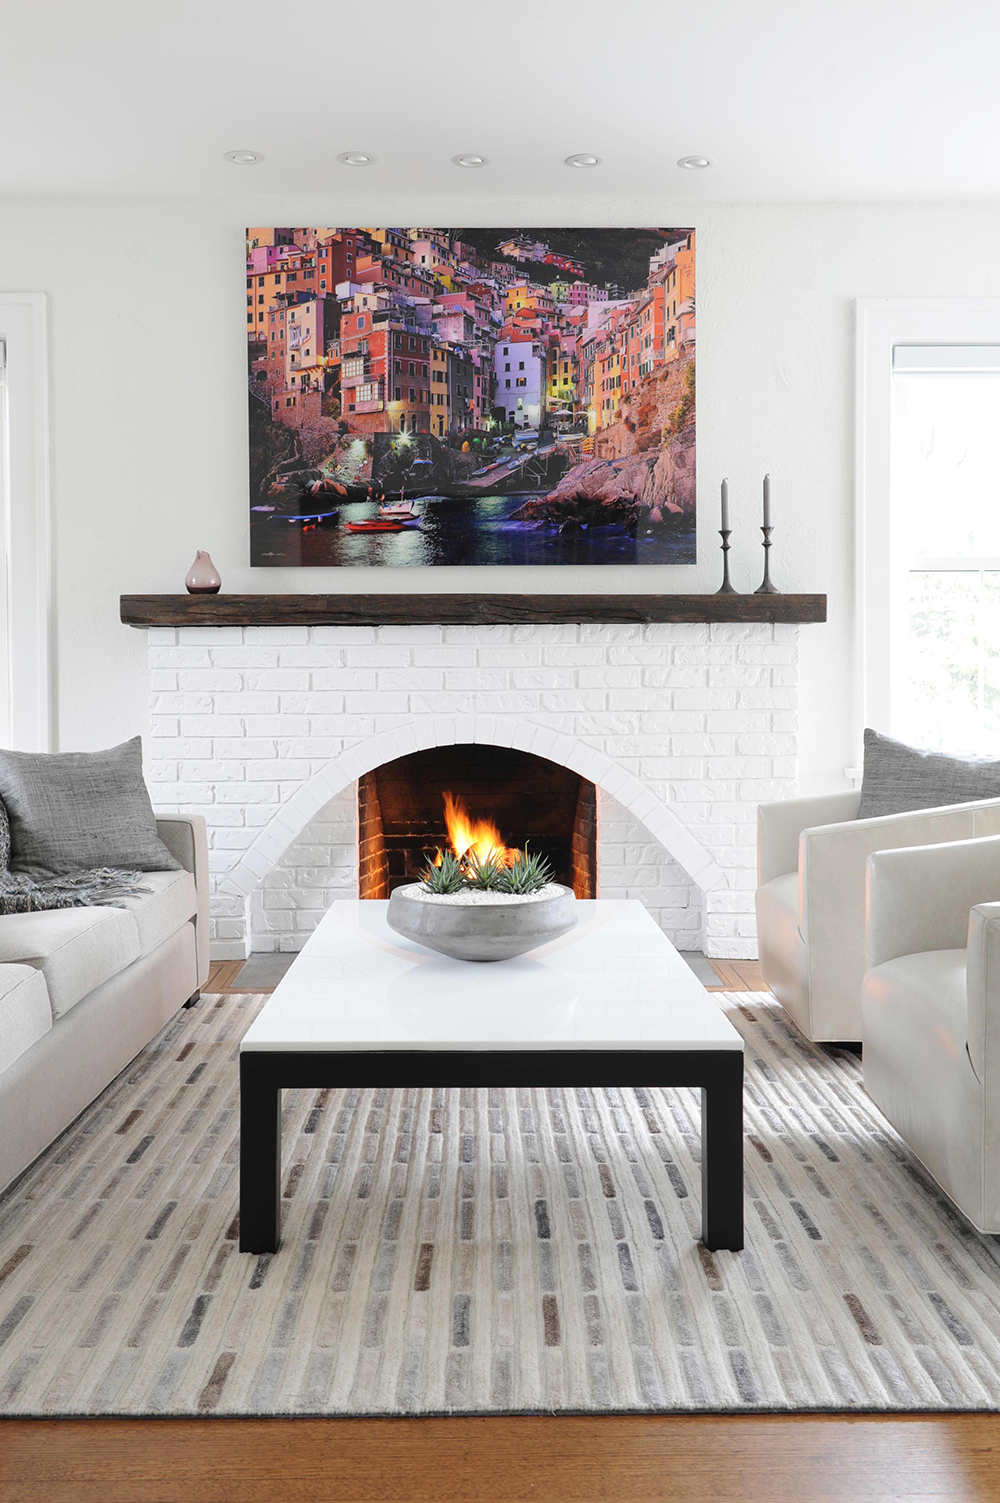 Large art piece of Italy's Cinque Terre hung above a brick fireplace.